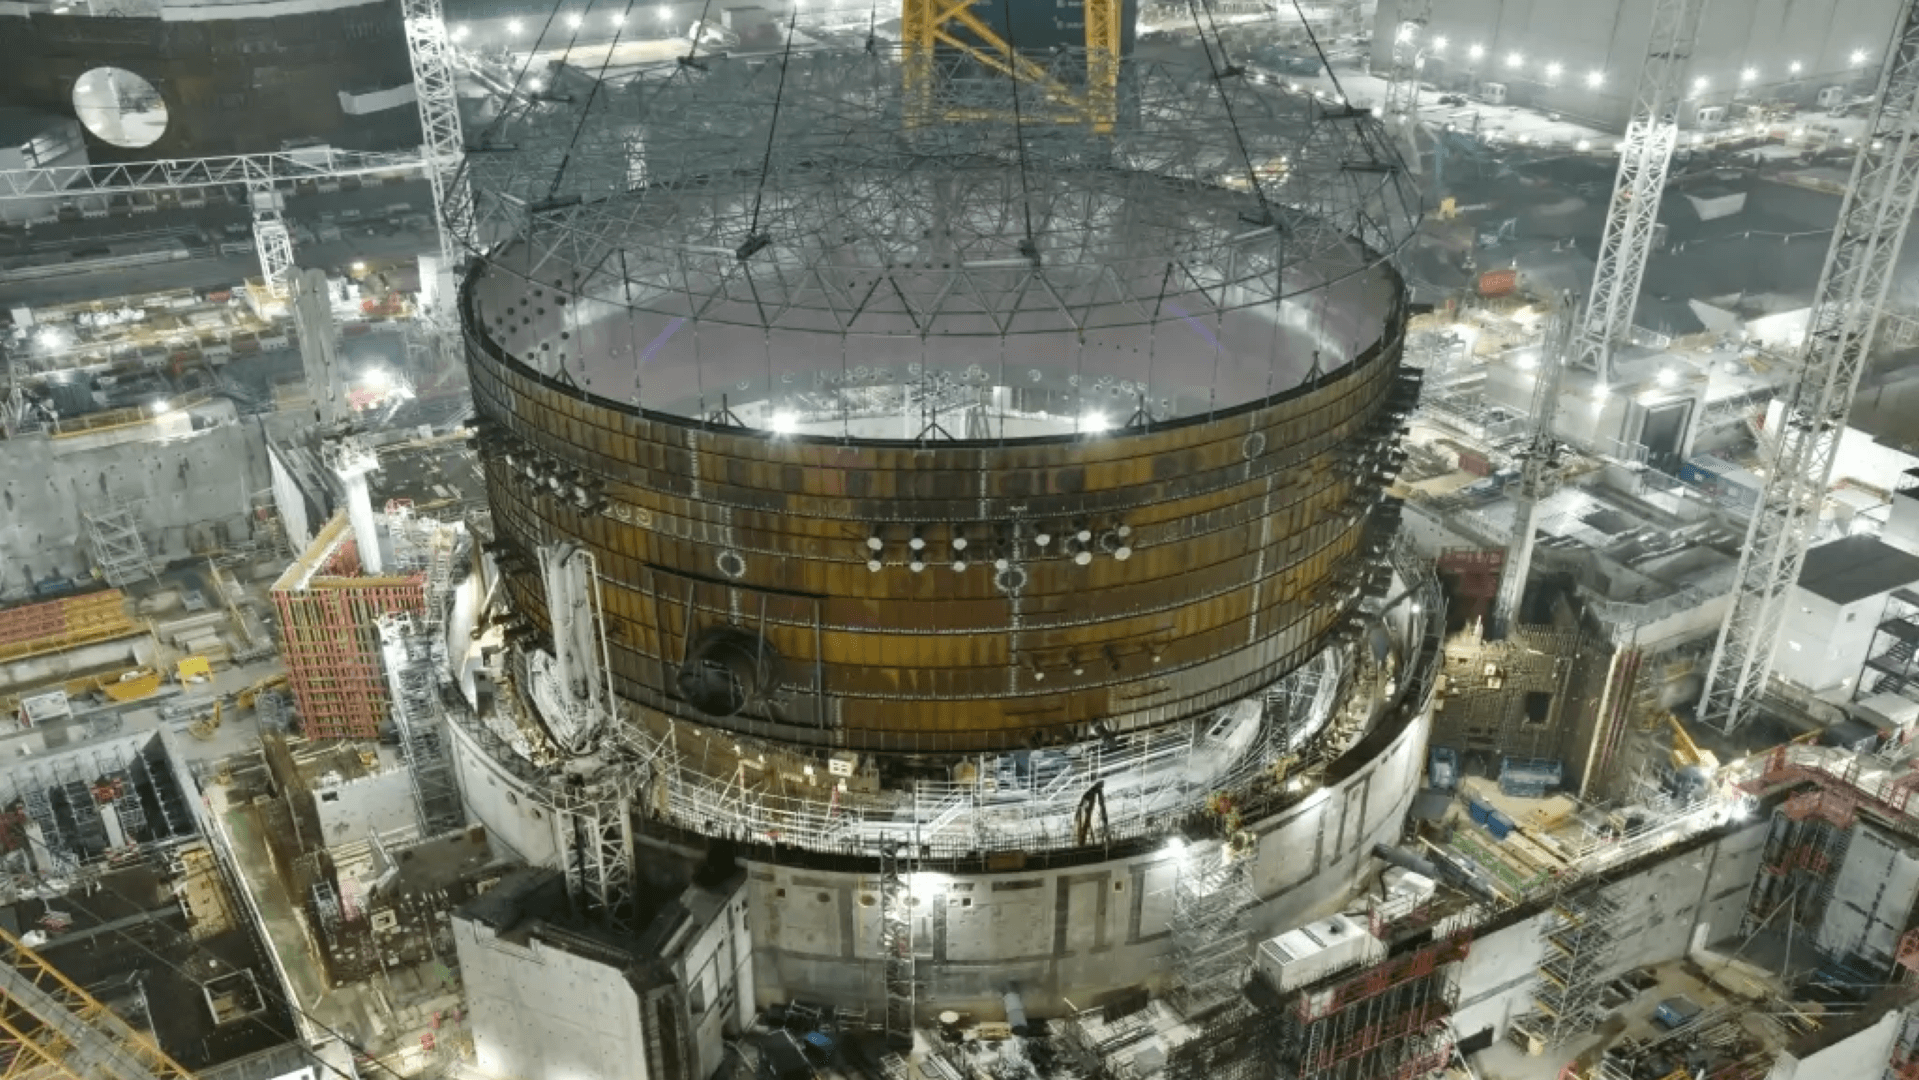 UK nuclear power station Hinkley Point C’s unit 2 under construction